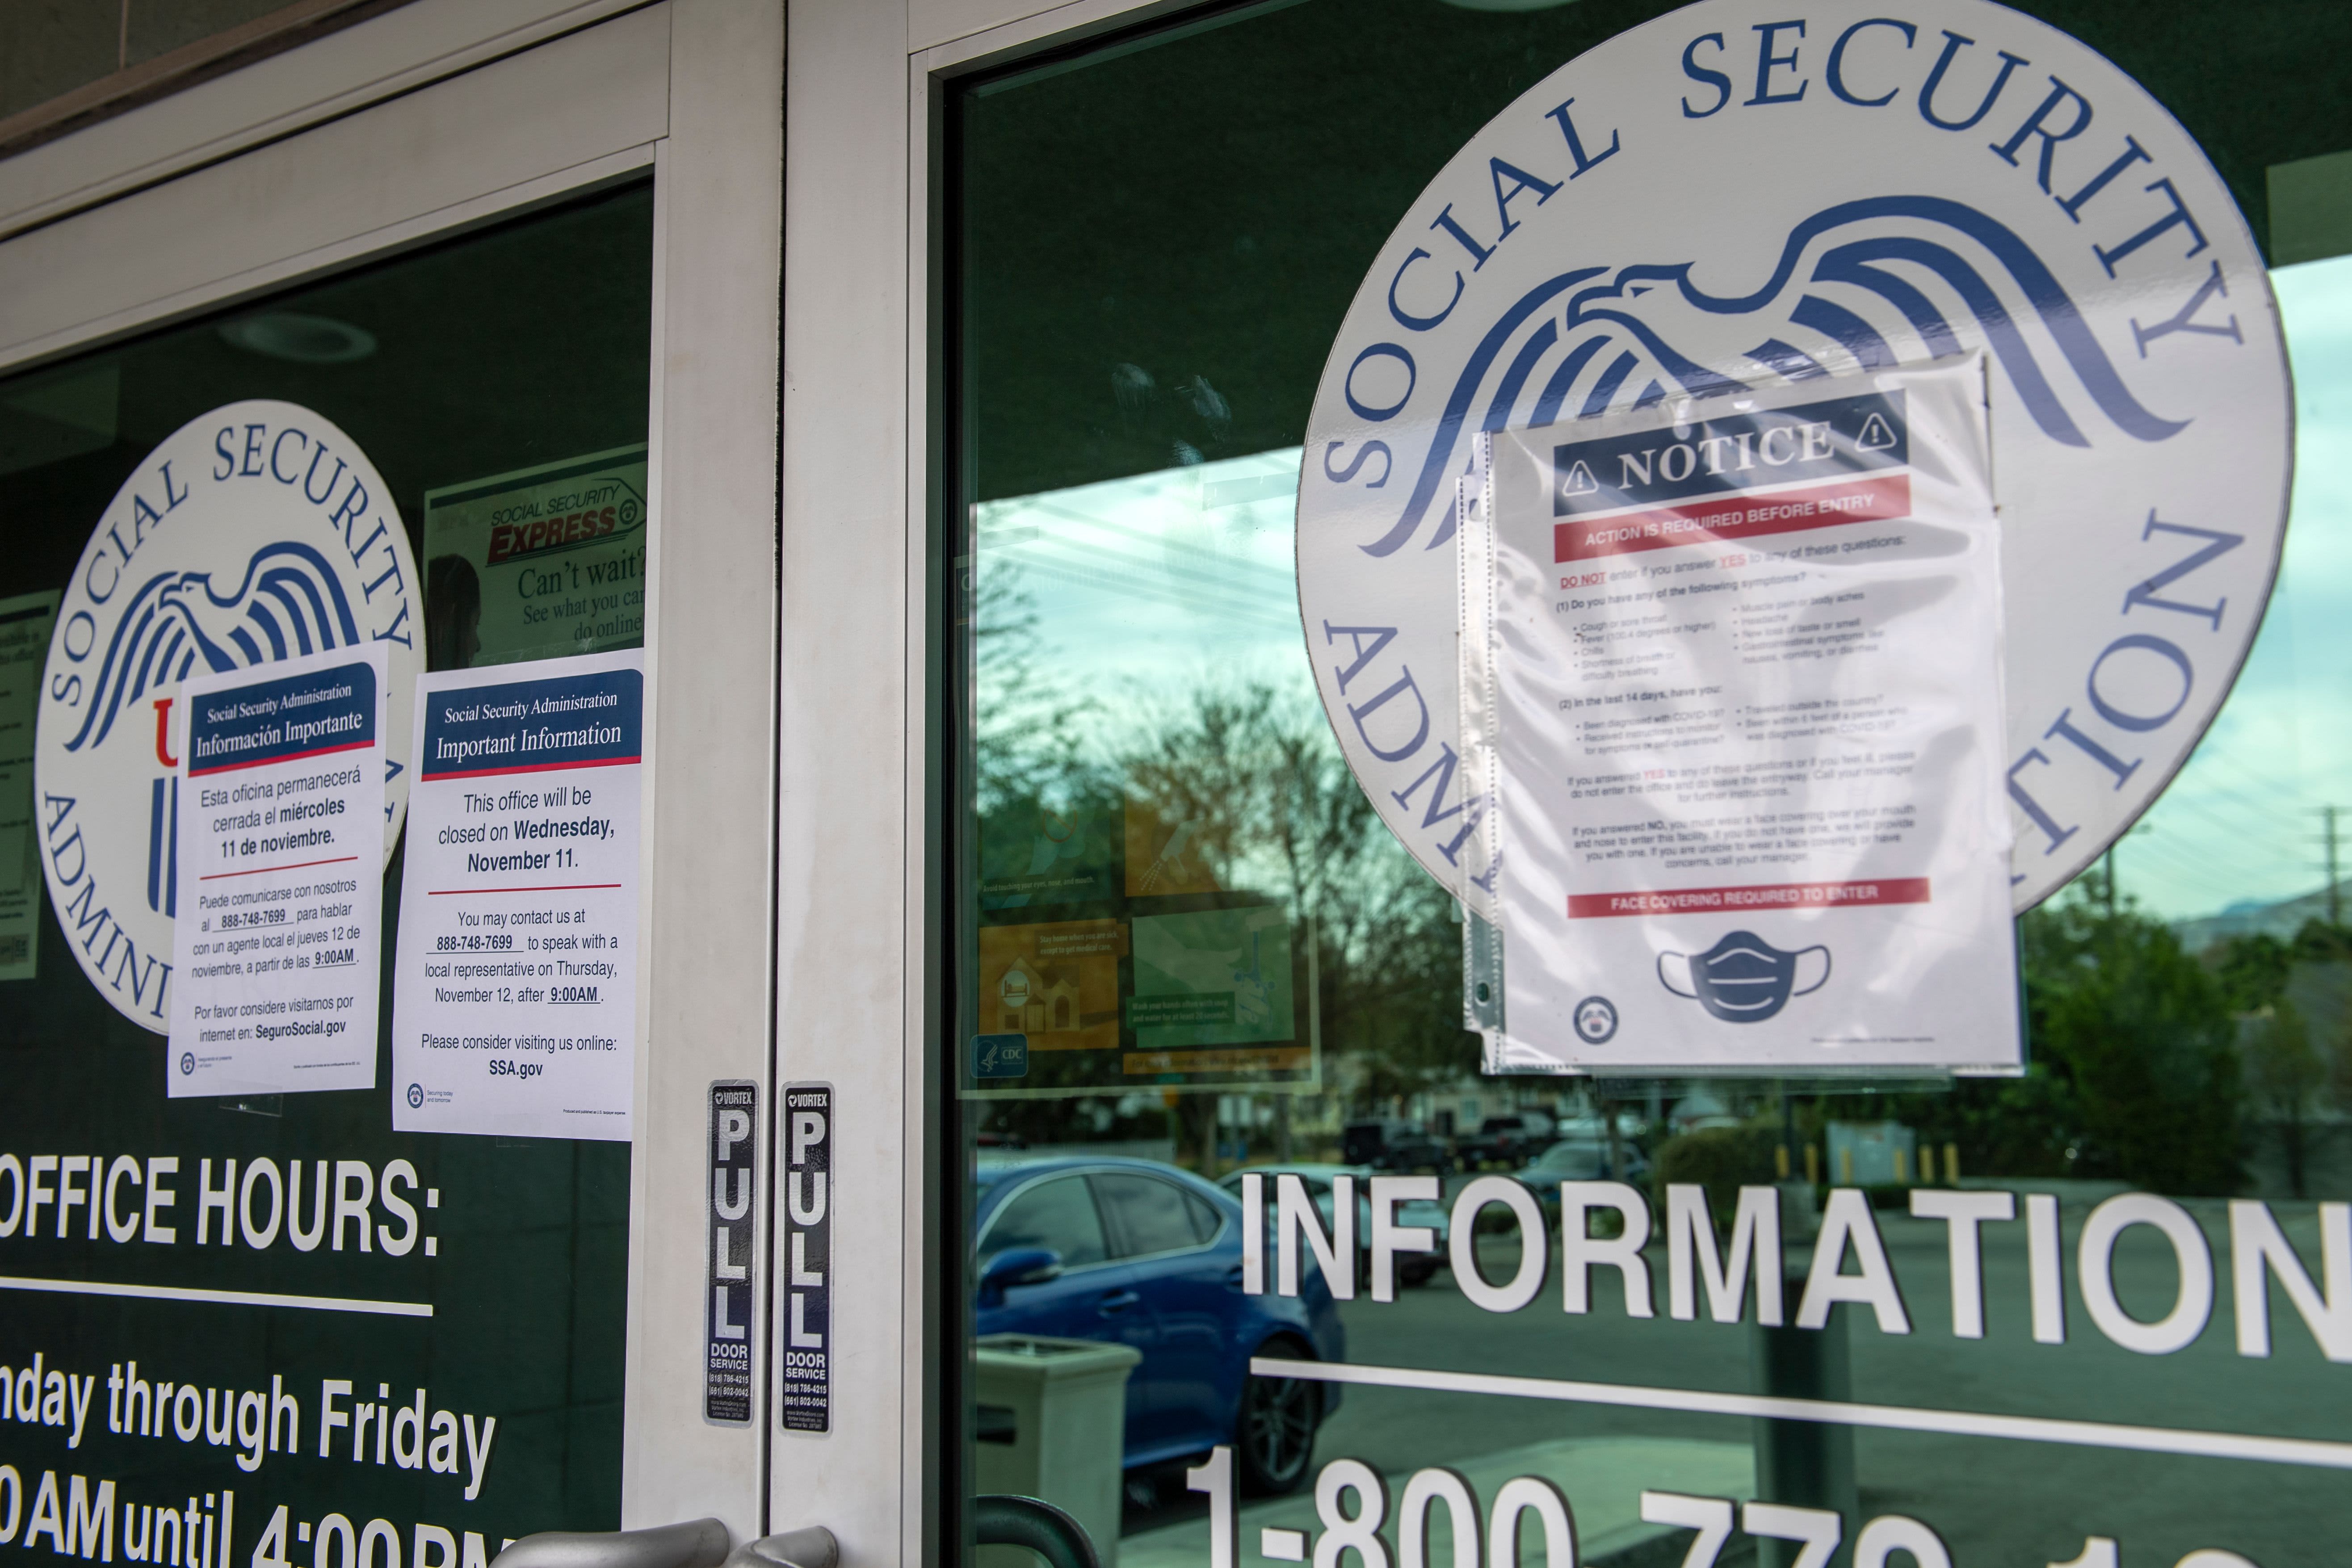 Still waiting on a Social Security benefit application or new card? New report shows how Covid-19 has delayed mail processing - CNBC